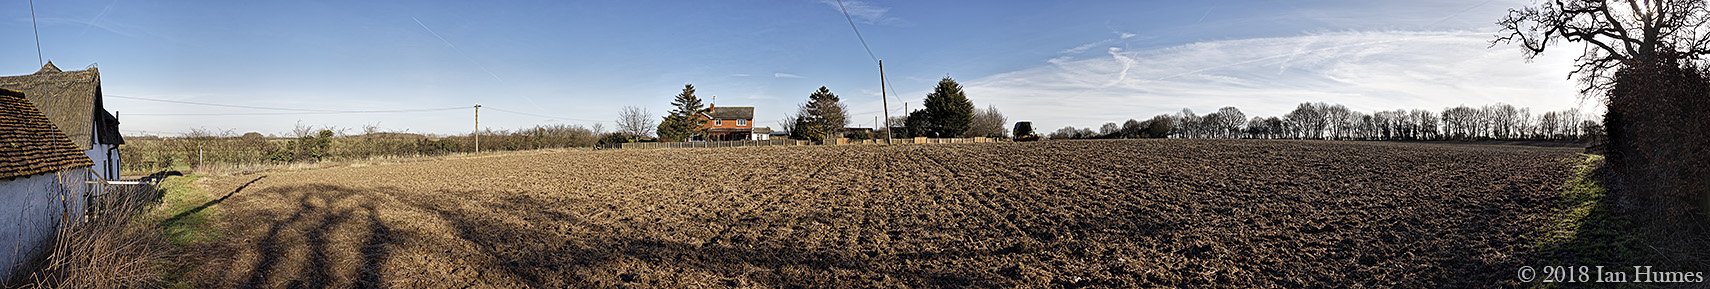 Ploughed Field - Essex